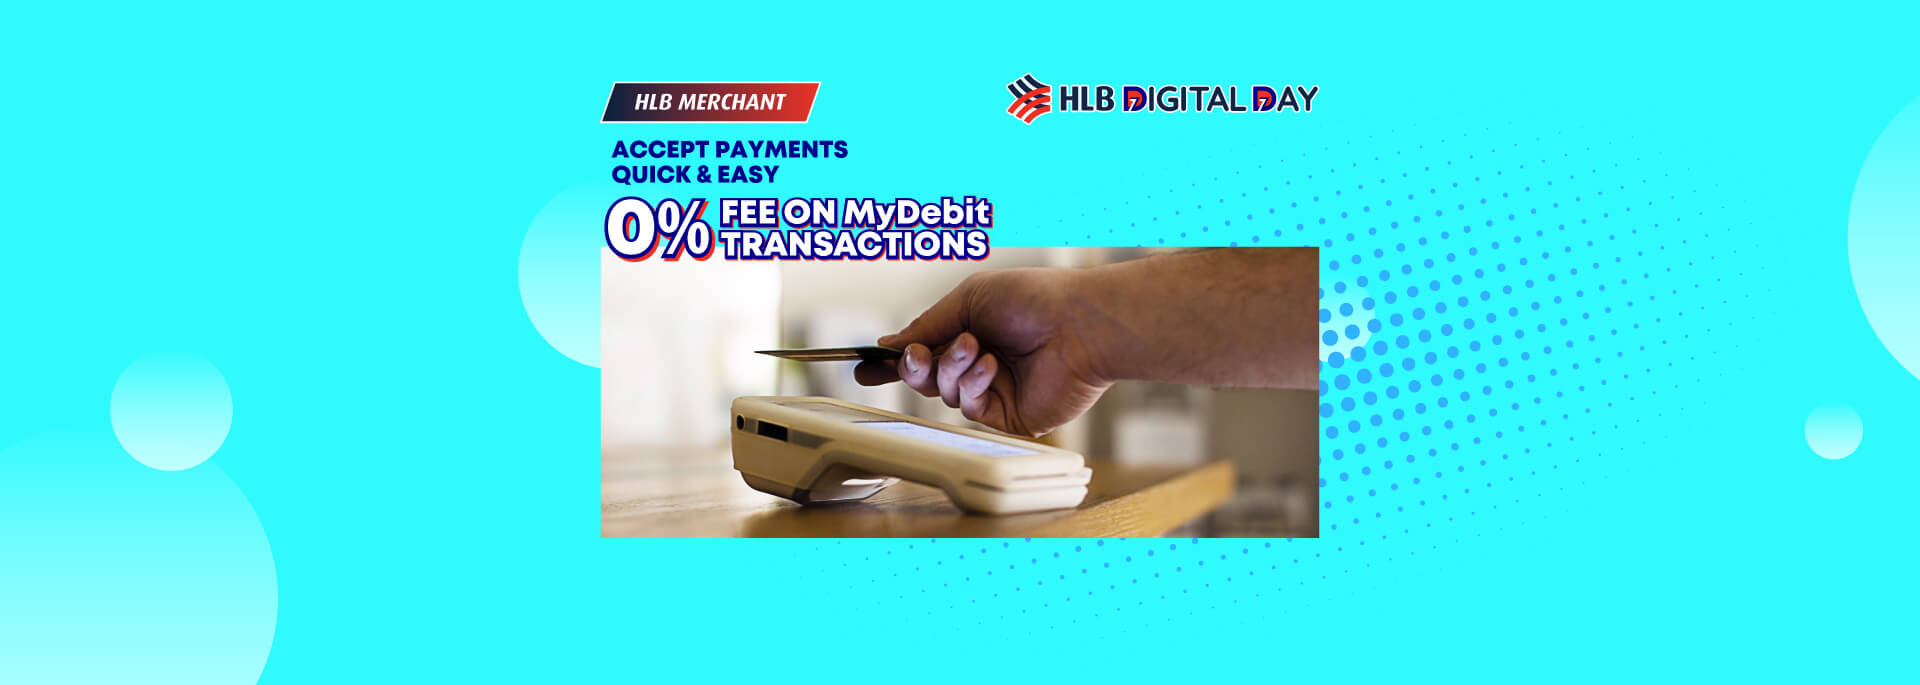 Accept payments quick easy 0% fee on MyDebit transactions